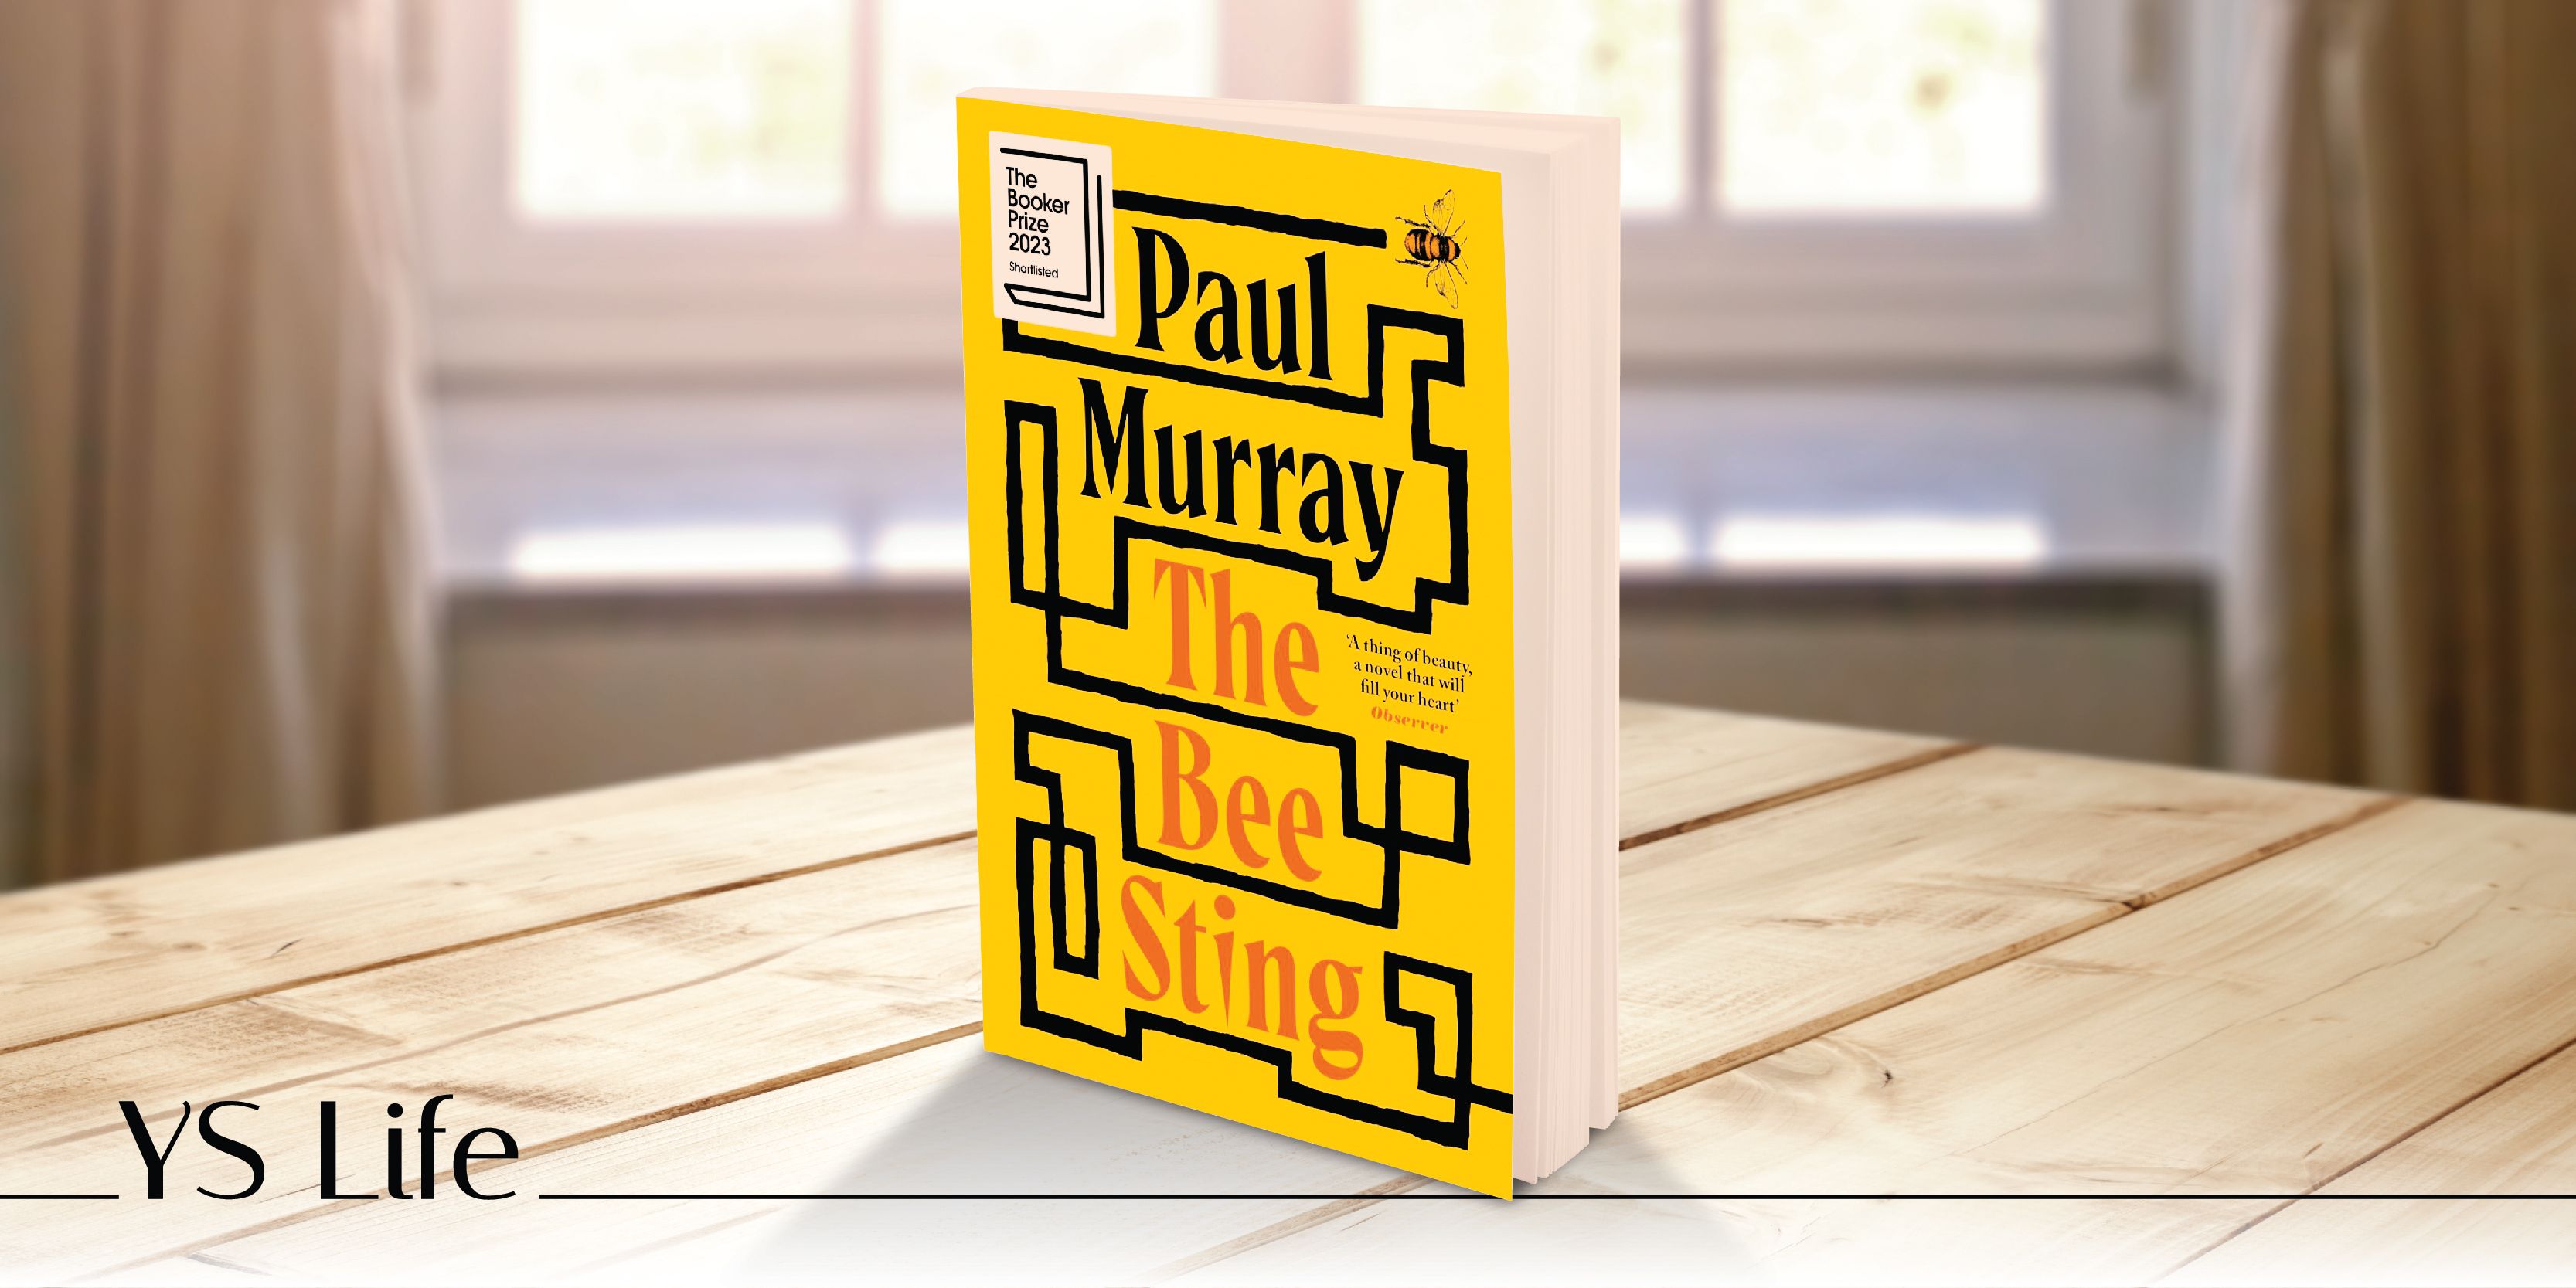 Man Booker Prize-shortlist The Bee Sting by Paul Murray is an immersive story of a family’s unravelling 